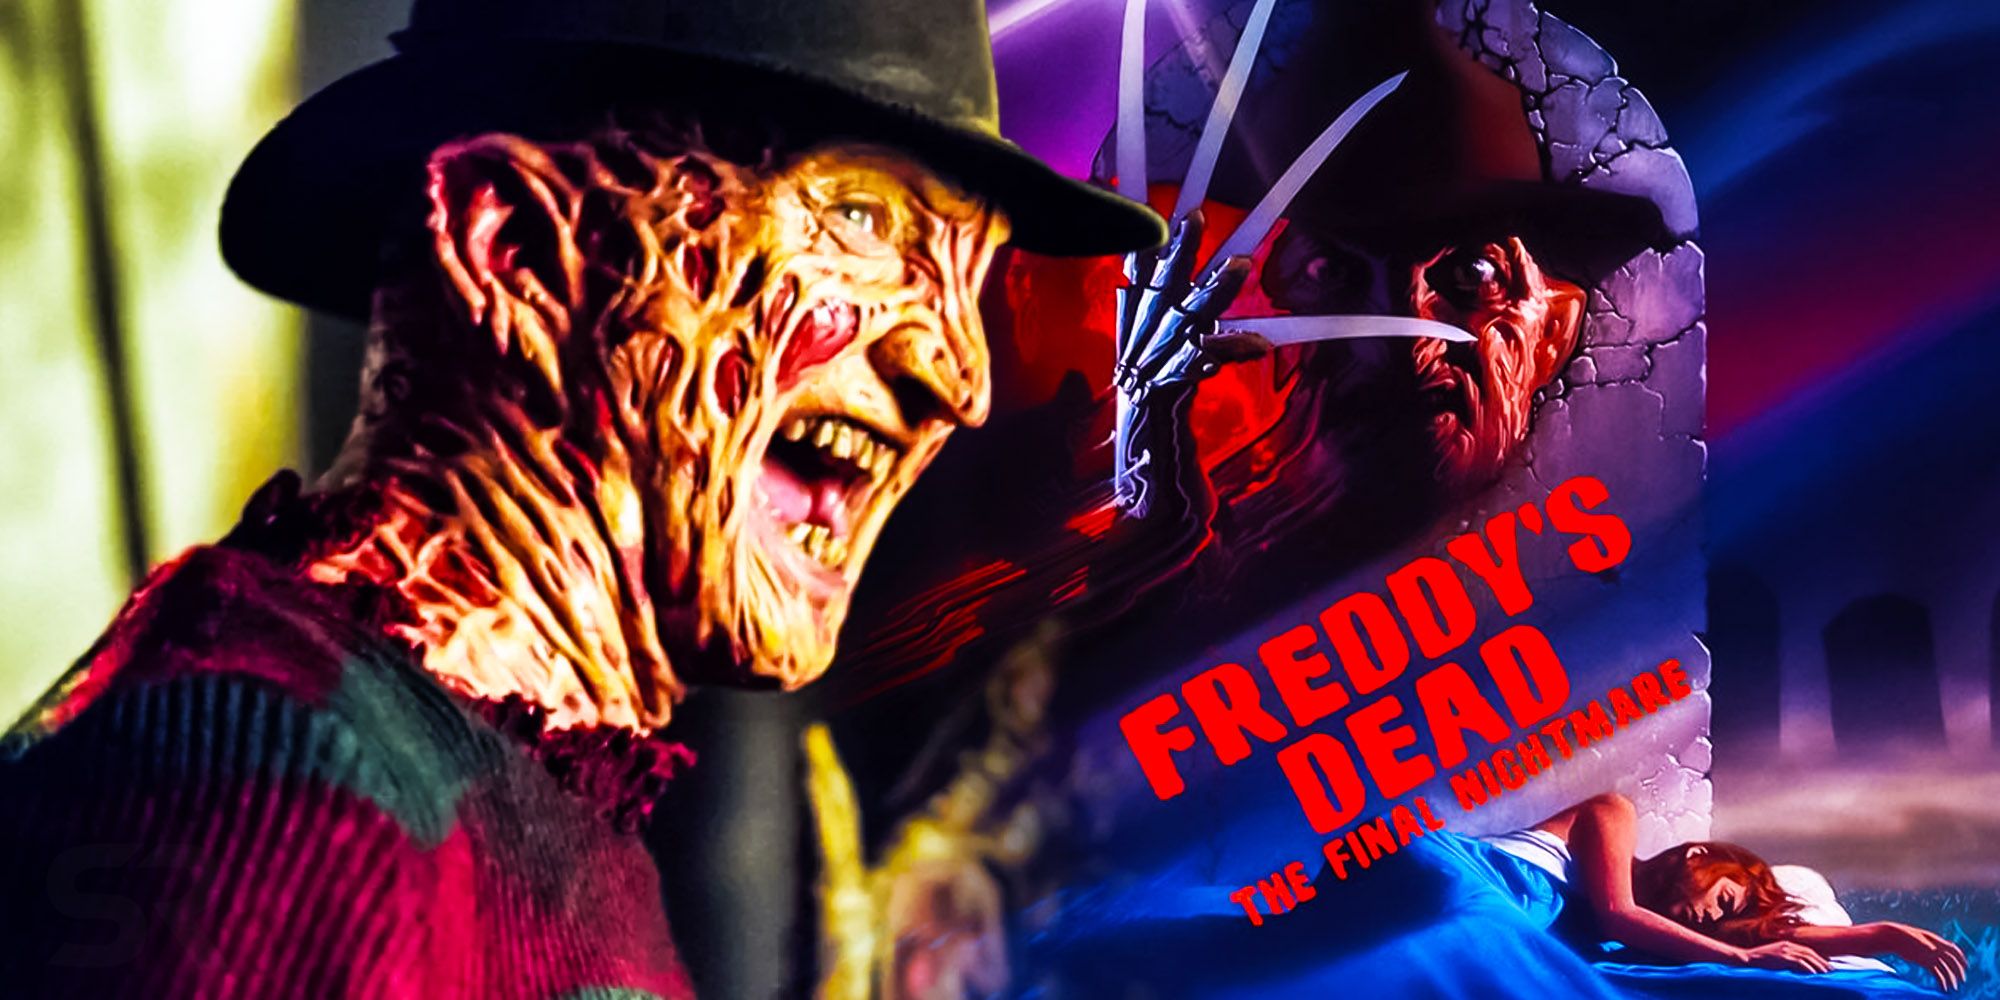 Film Review: Freddy's Dead: The Final Nightmare – Milam's Musings